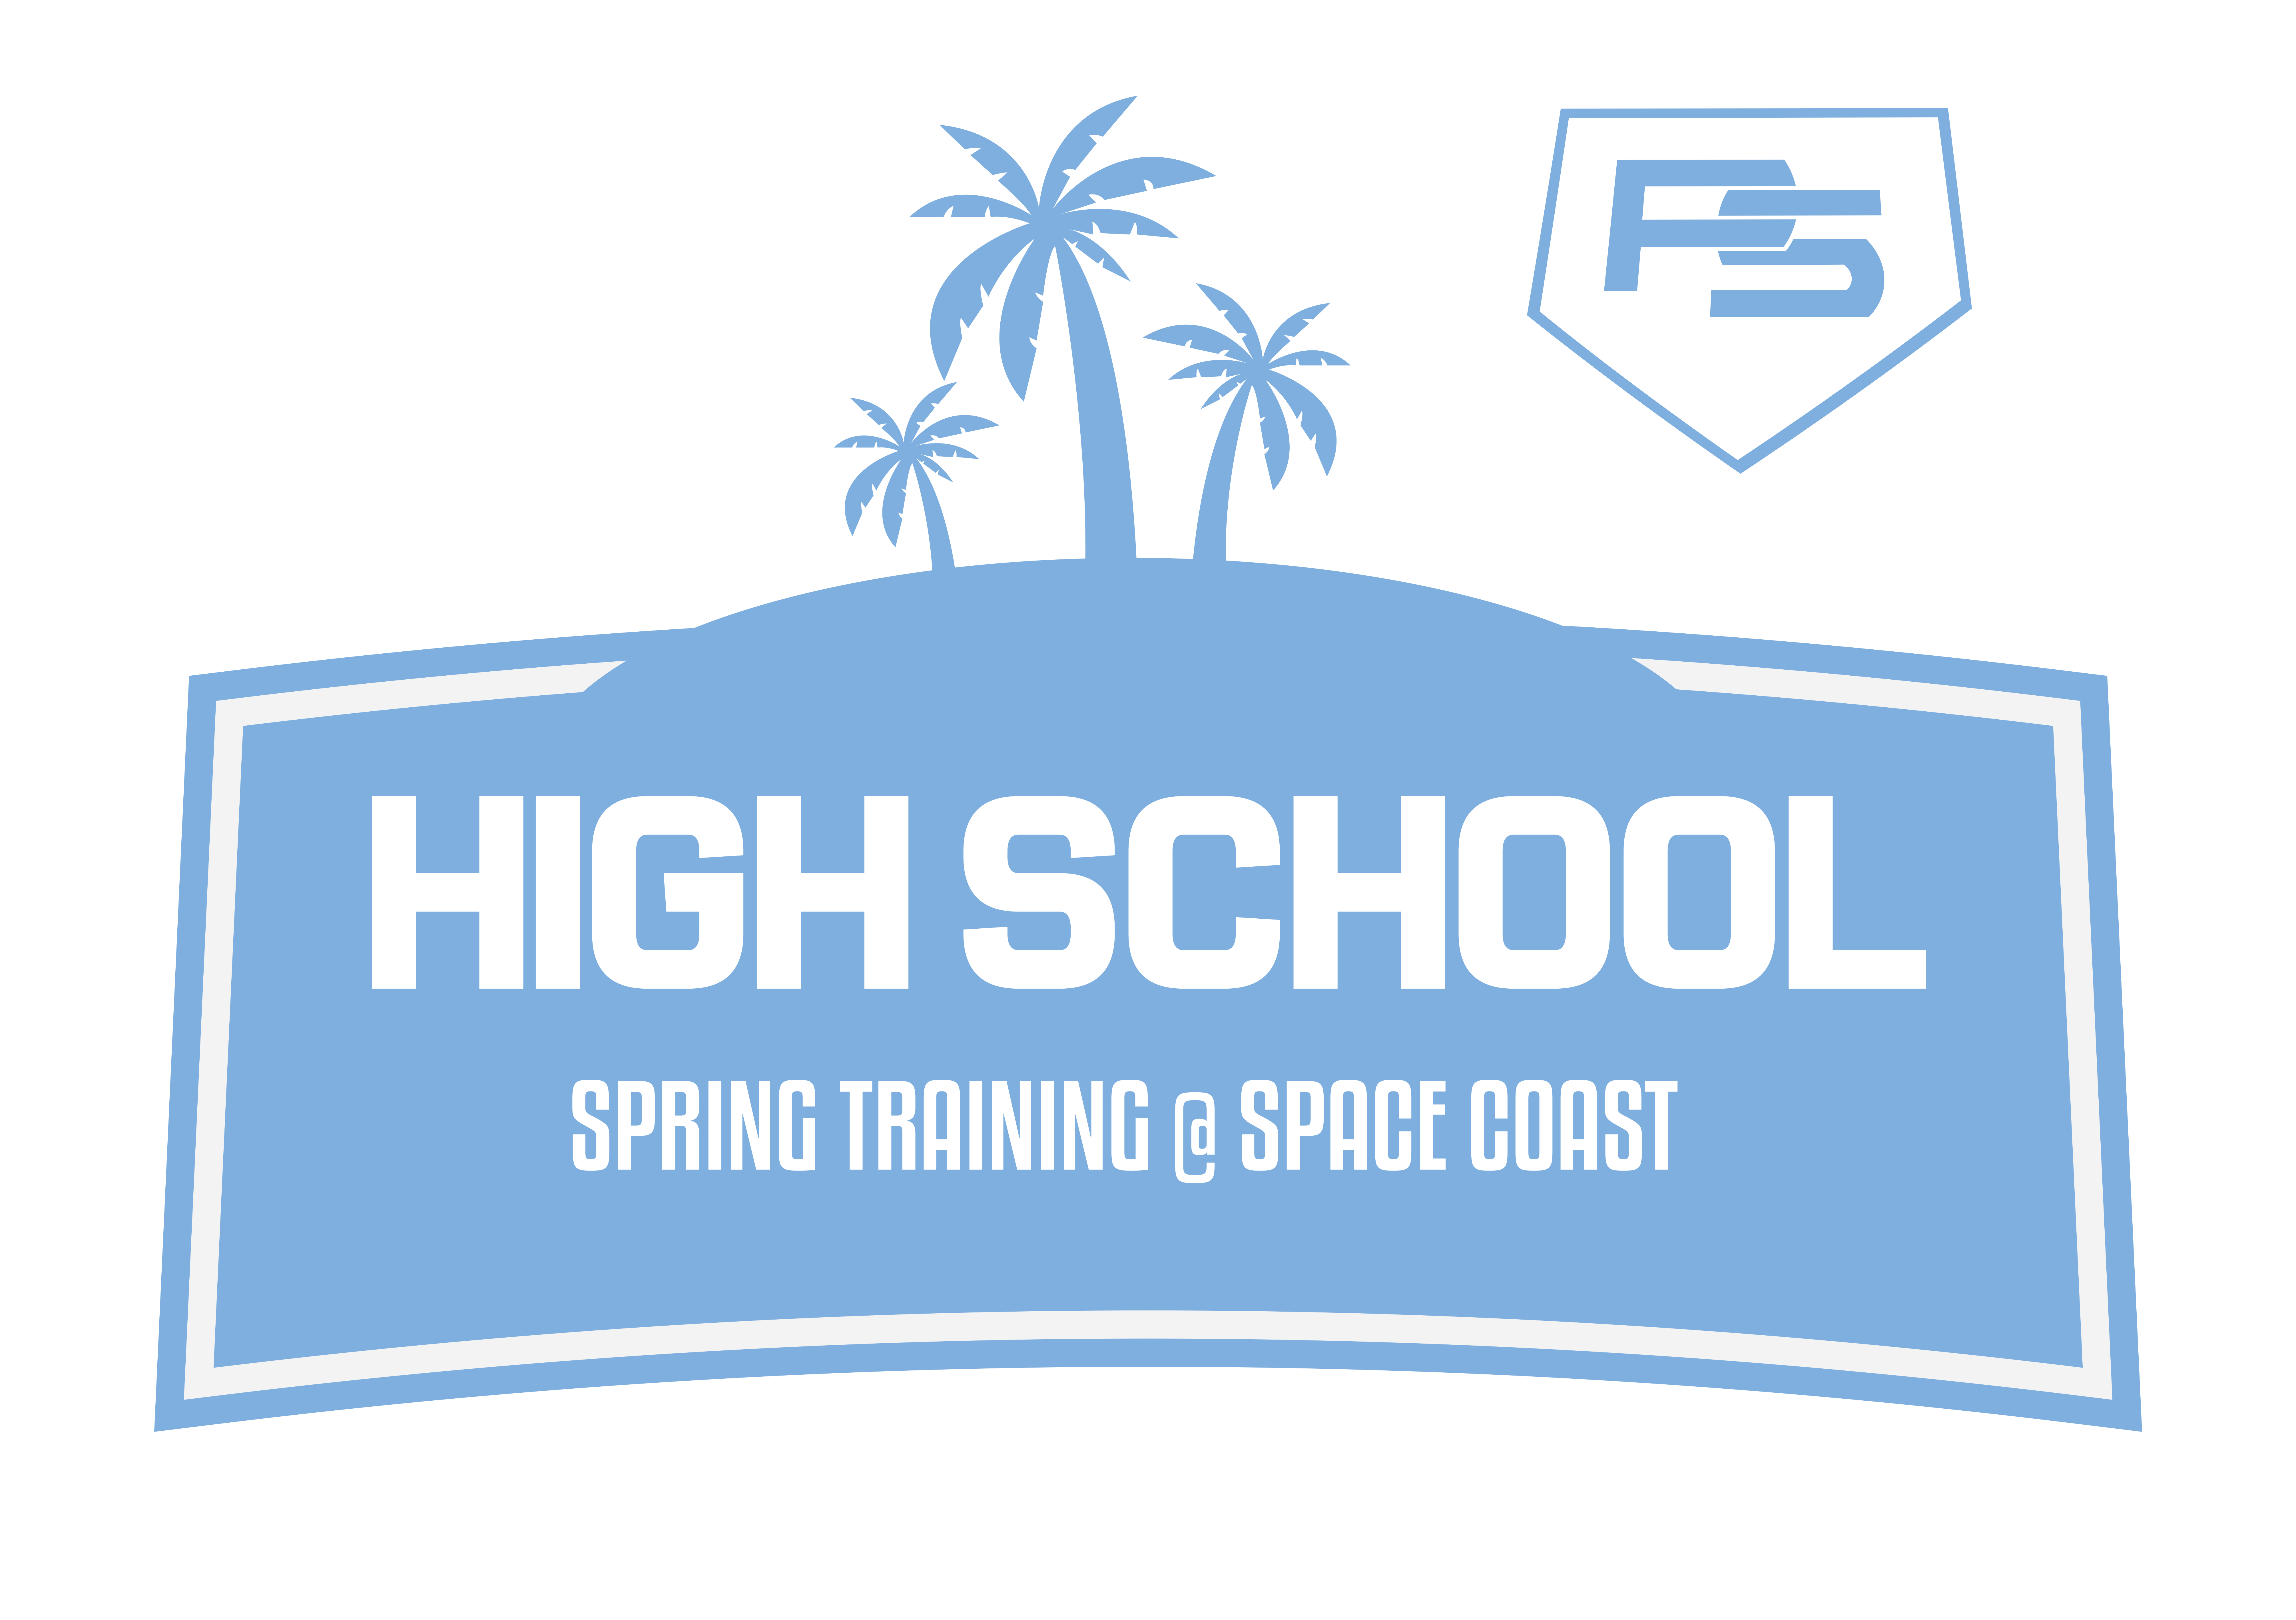 The Launch @ Space Coast - March 14-16